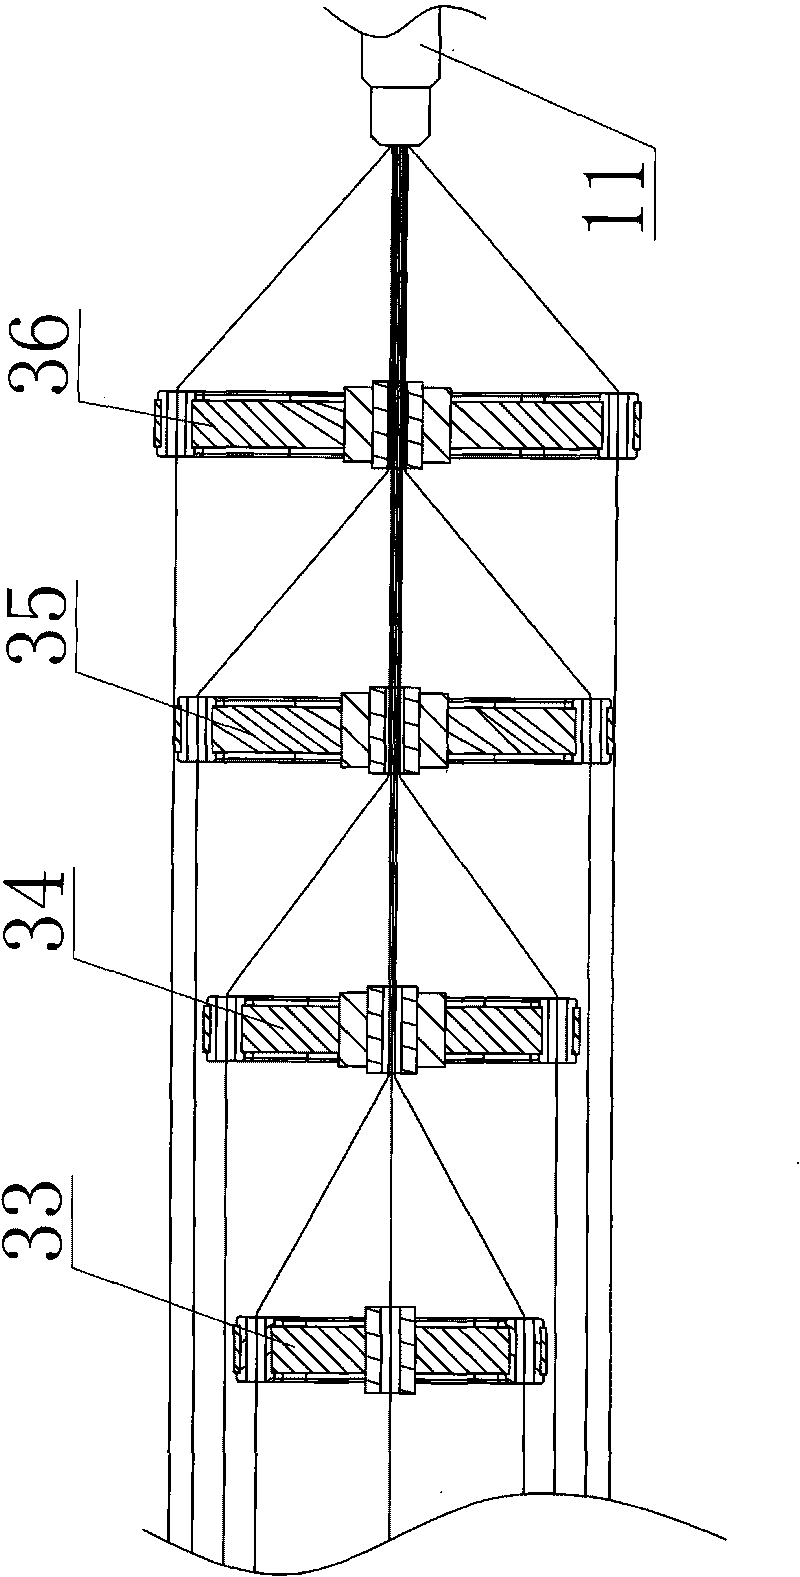 Multilayer and multi-strand wire twisting method and device implementing same